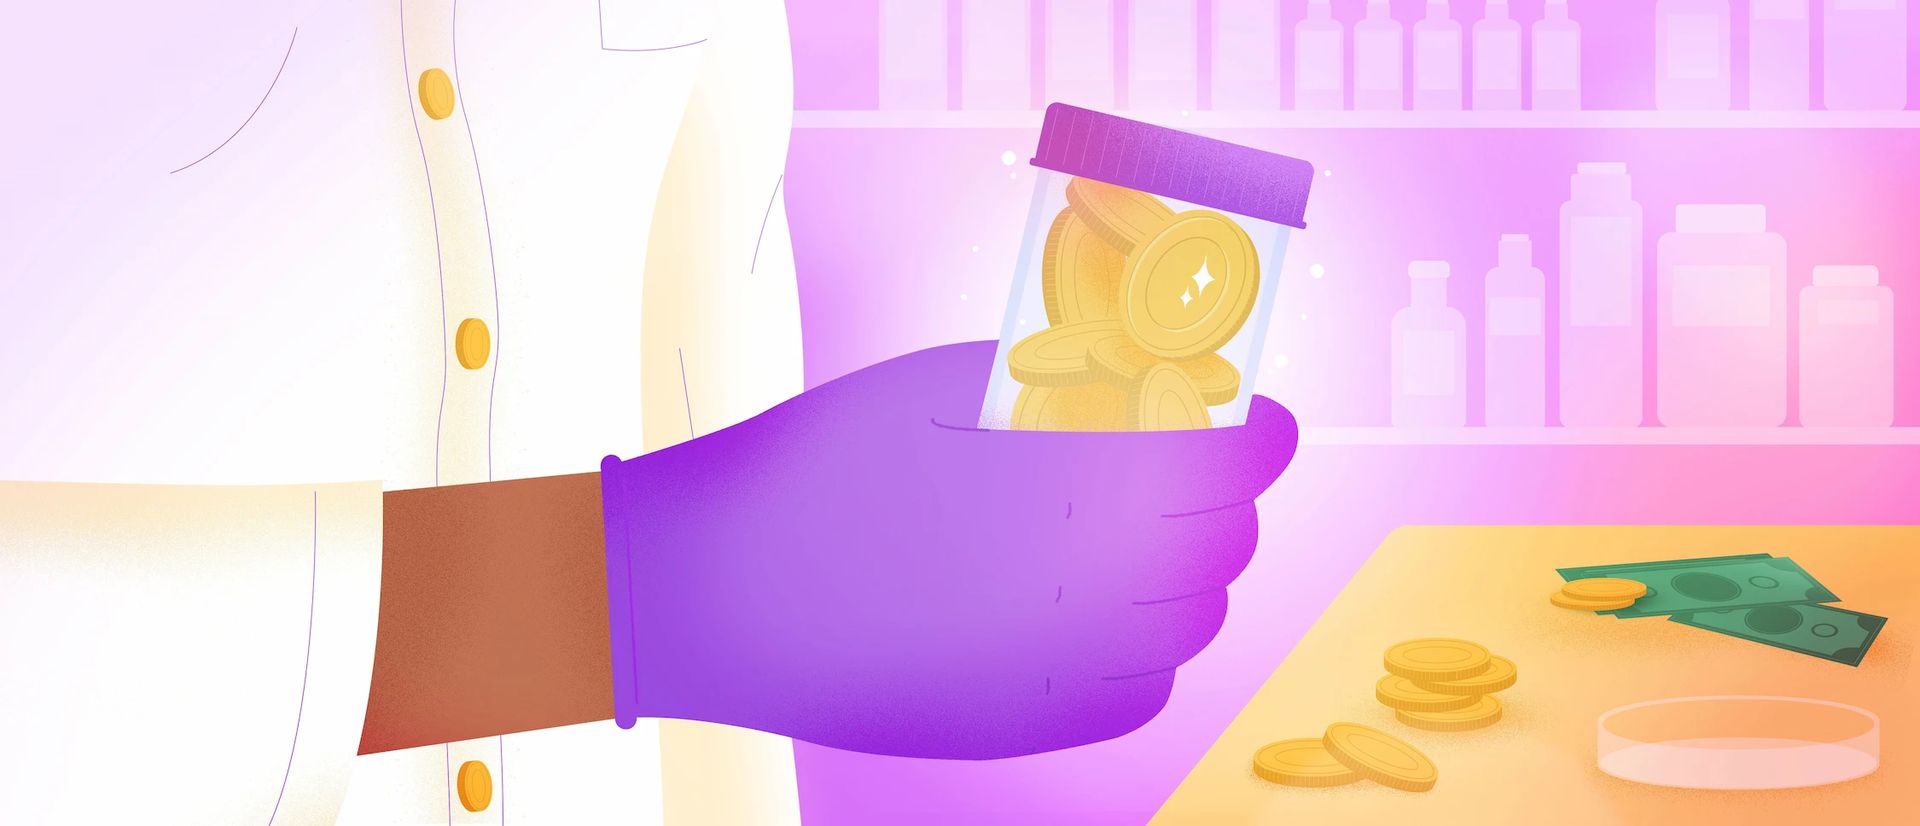 Hand with a glove holding a jar filled with coins, behind which is a pharmacy background.